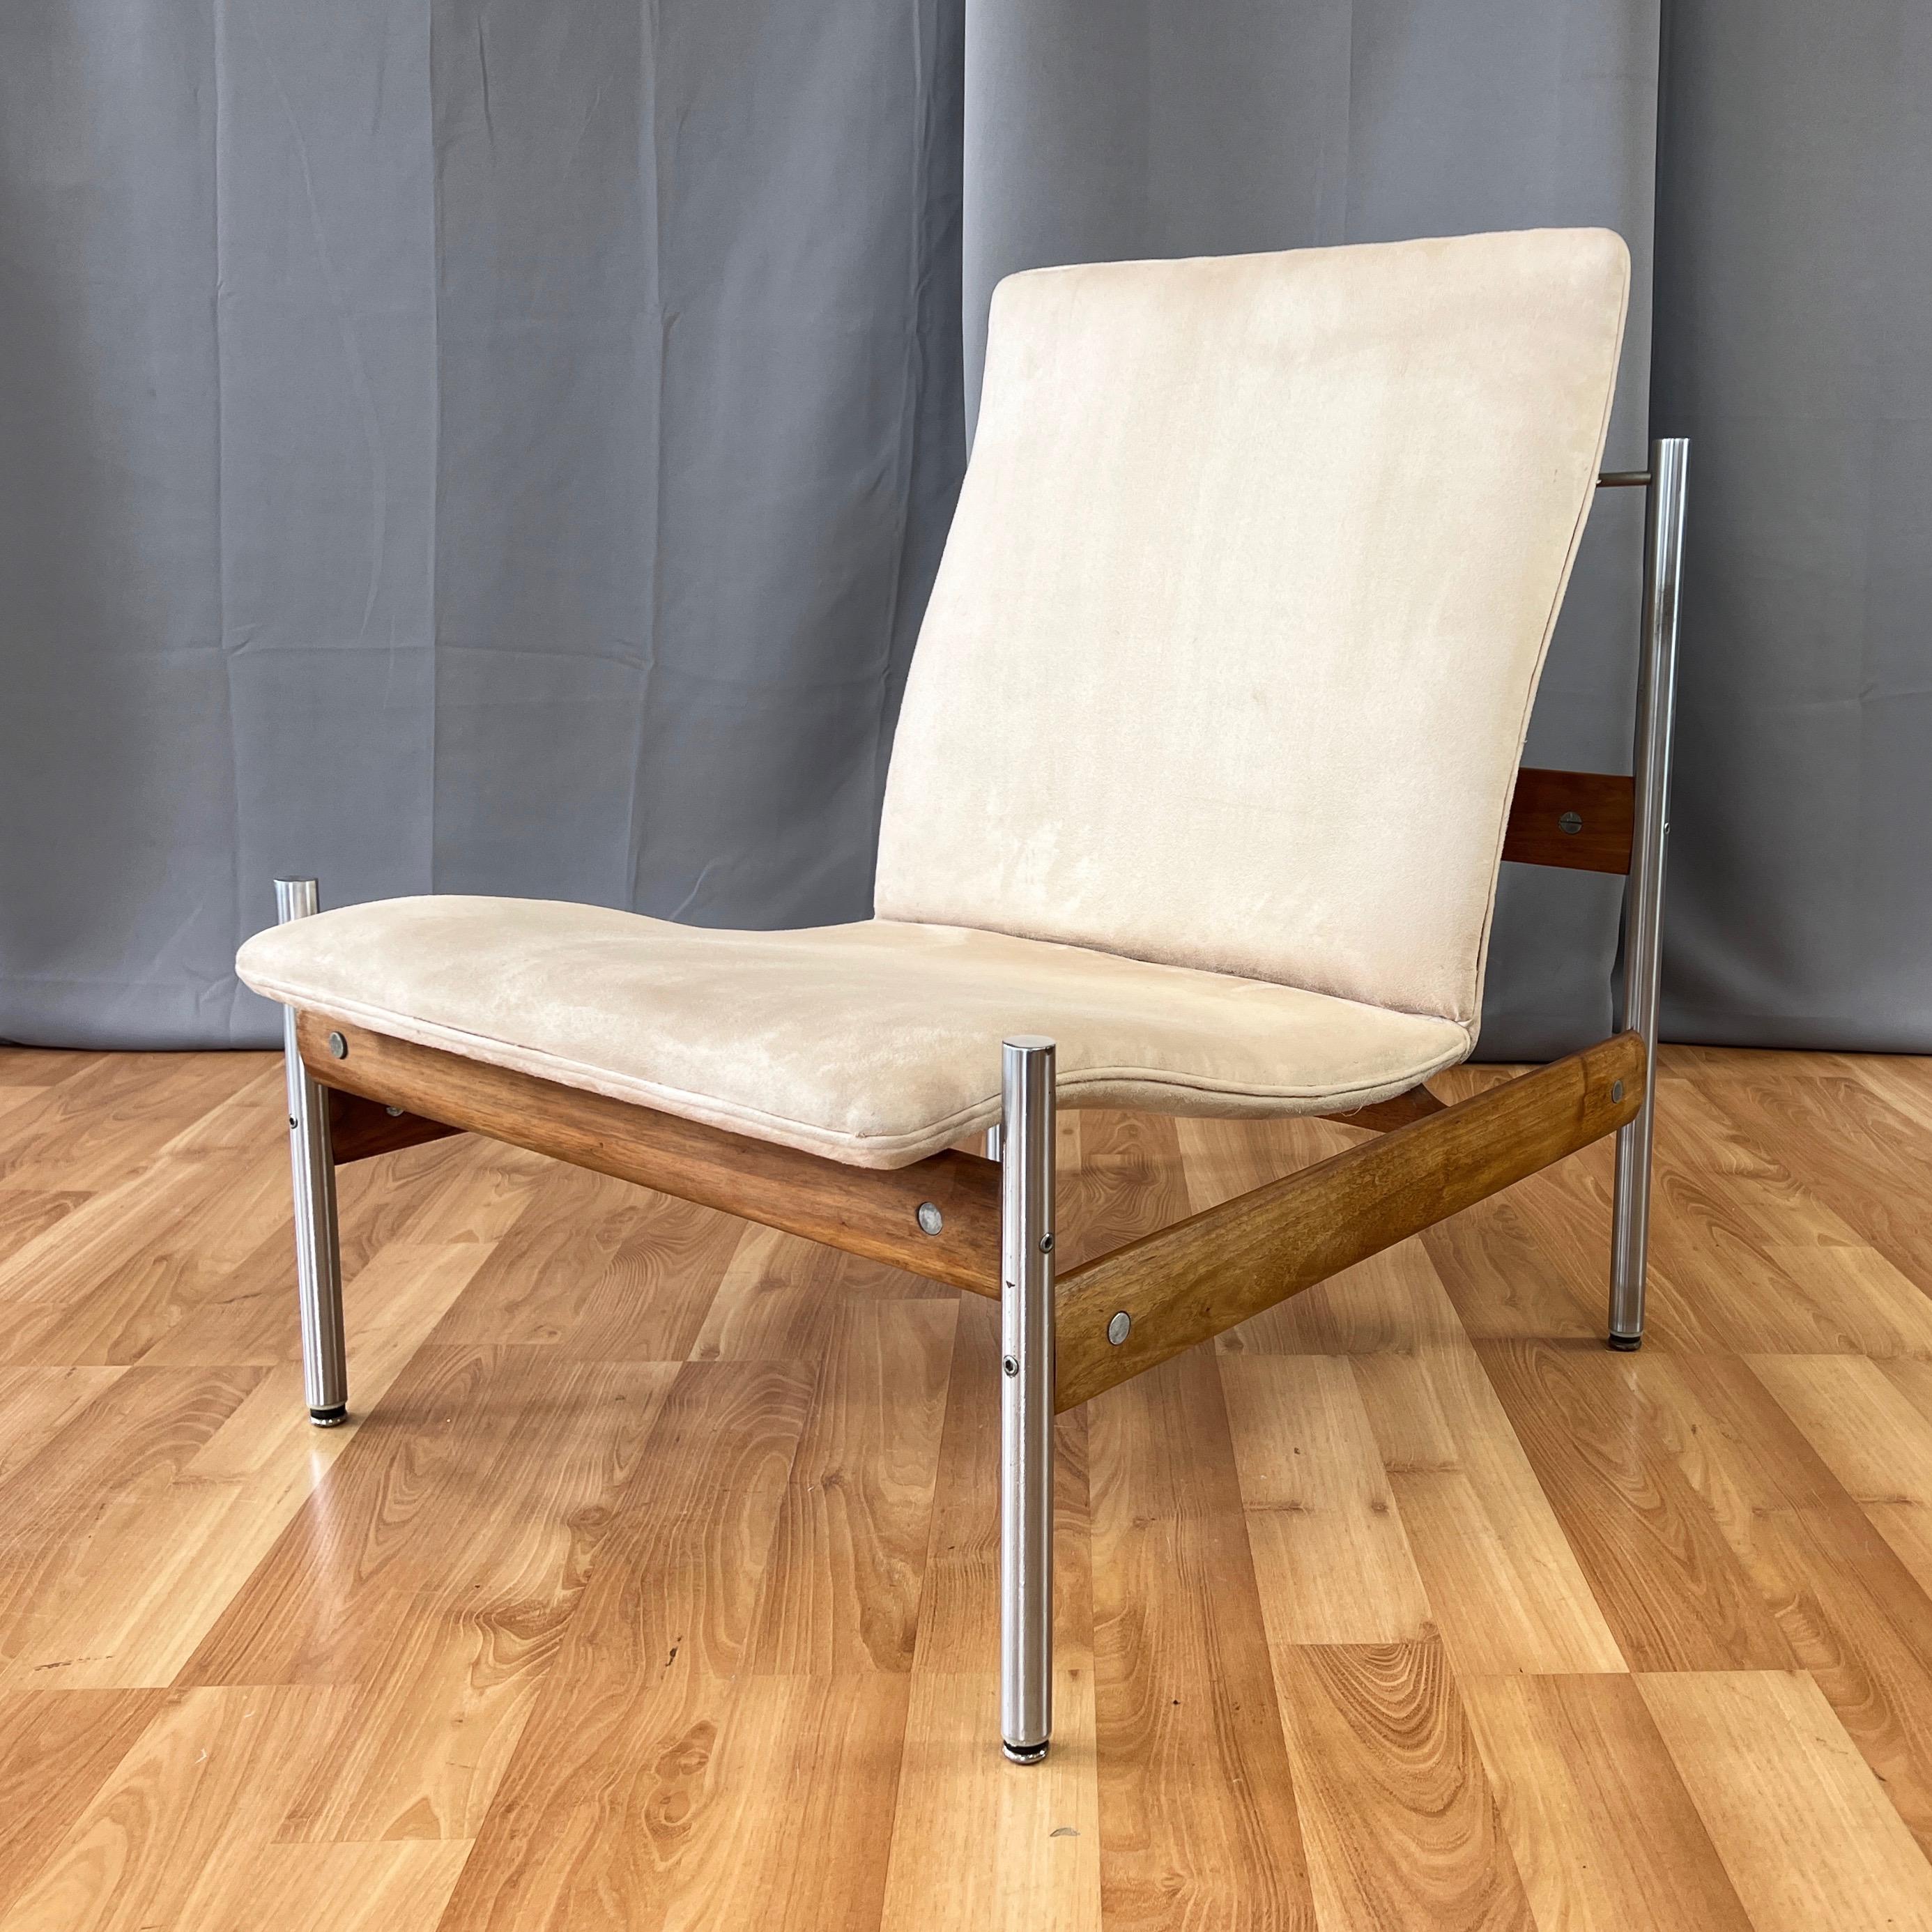 A rare teak and nickel armless version of the model 1000 AF lounge chair by Sven Ivar Dysthe for Dokka Møbler of Norway. Designed in 1959, this example dates from the 1960s with ultrasuede reupholstery from the 1970s.

Frame features substantial